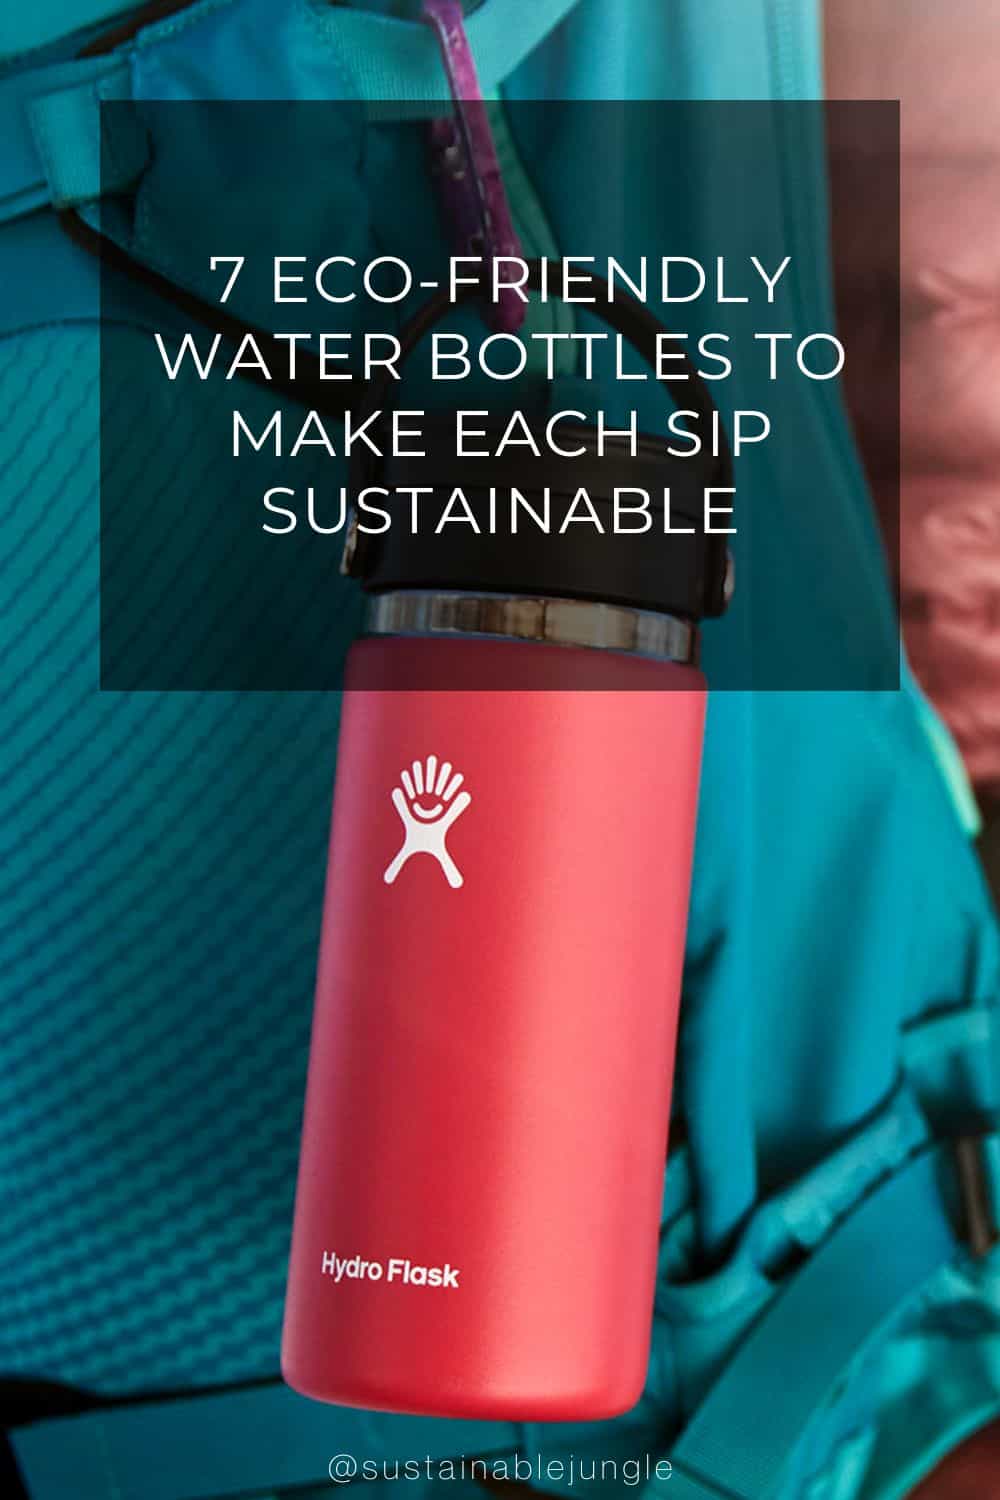 7 Eco-Friendly Water Bottles To Make Each Sip Sustainable Image by Hydro Flask #ecofriendlywaterbottles #ecofriendlystainlesssteelwaterbottles #ecofriendlyreusablewaterbottles #sustainablewaterbottles #sustainableglasswaterbottles #ecofriendlybottles #sustainablejungle